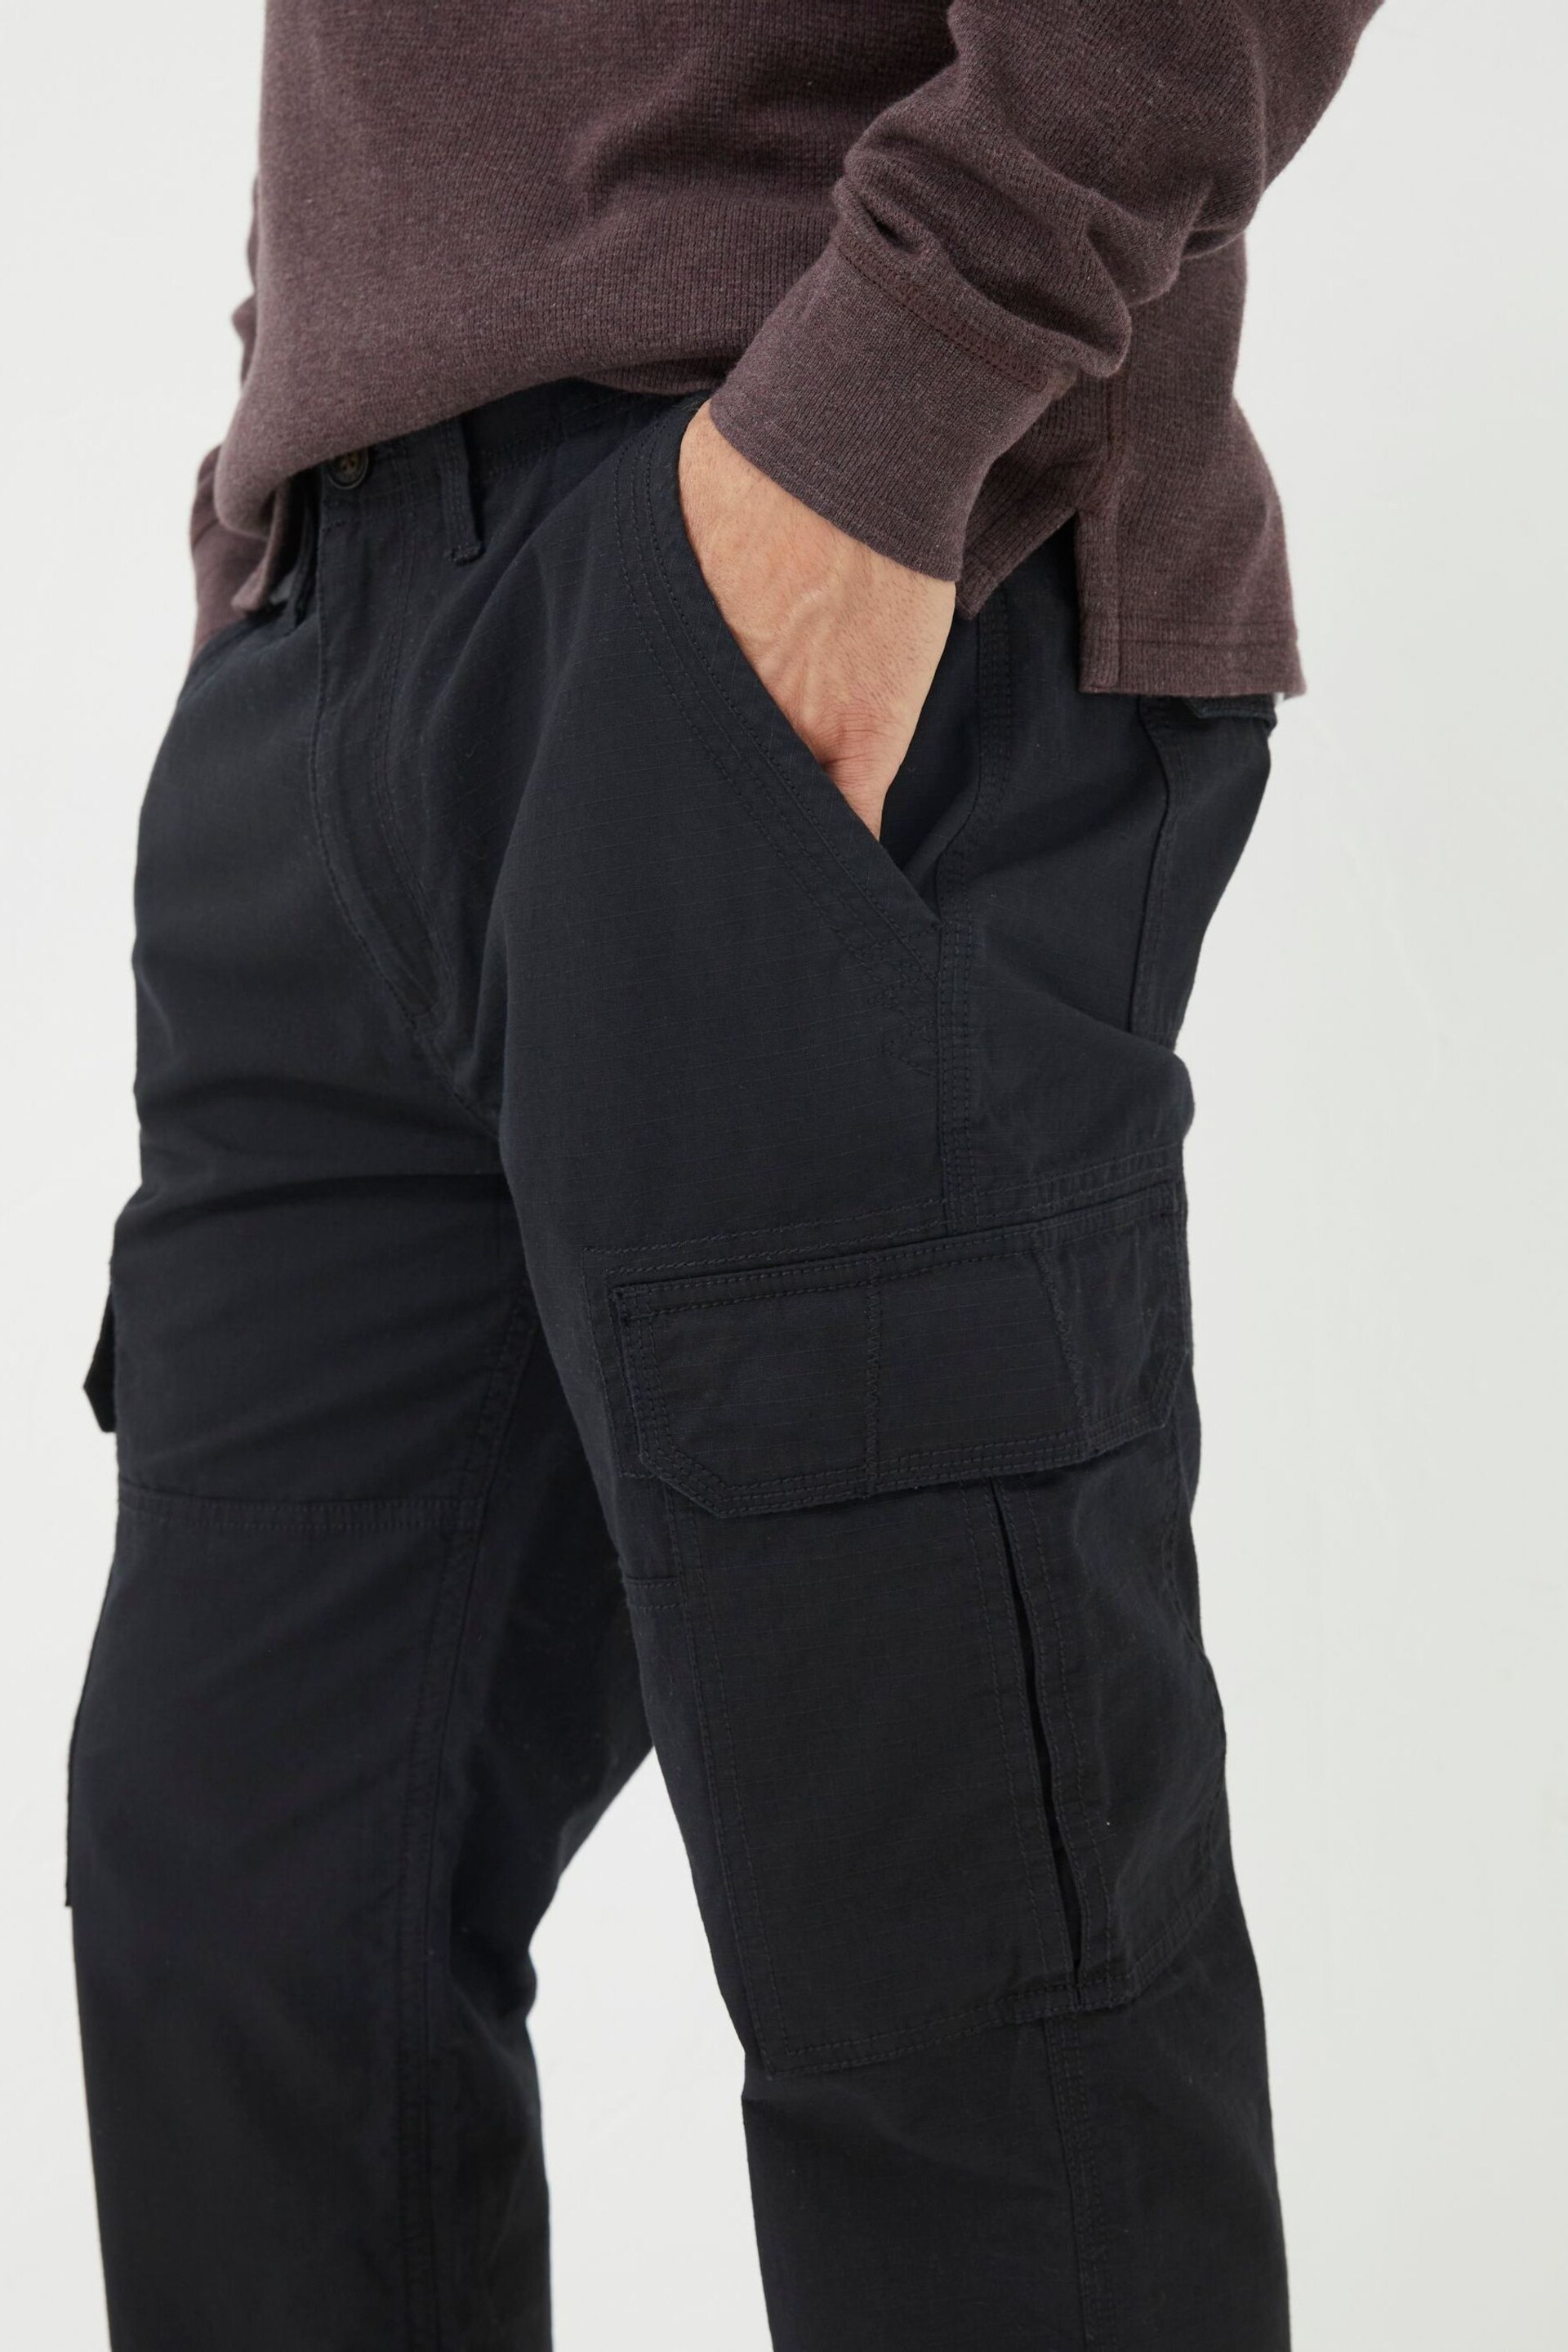 FatFace Black Ripstop Cargo Trousers - Image 4 of 5